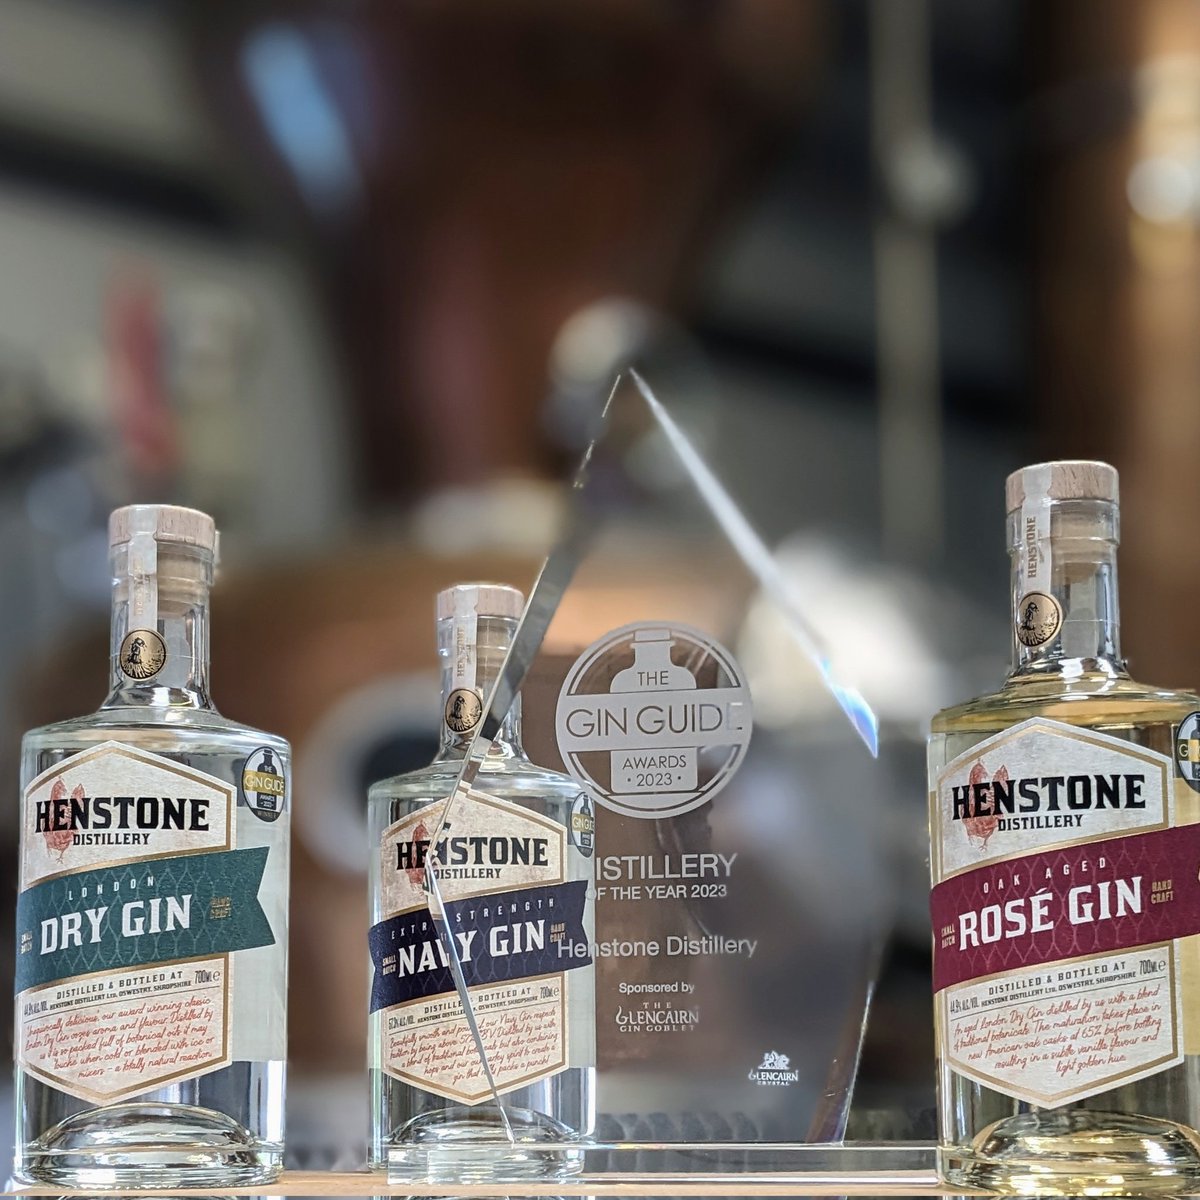 Wow, here's our Distillery of the Year 2023 trophy!! Thank you @theginguide and @GlencairnGlass we're absolutely delighted 😊 #gin #awardwinning #awardwinner #tgga2023 #ginguideawards #ginguide #oswestry #shropshire #supportsmallbusiness #supportlocal